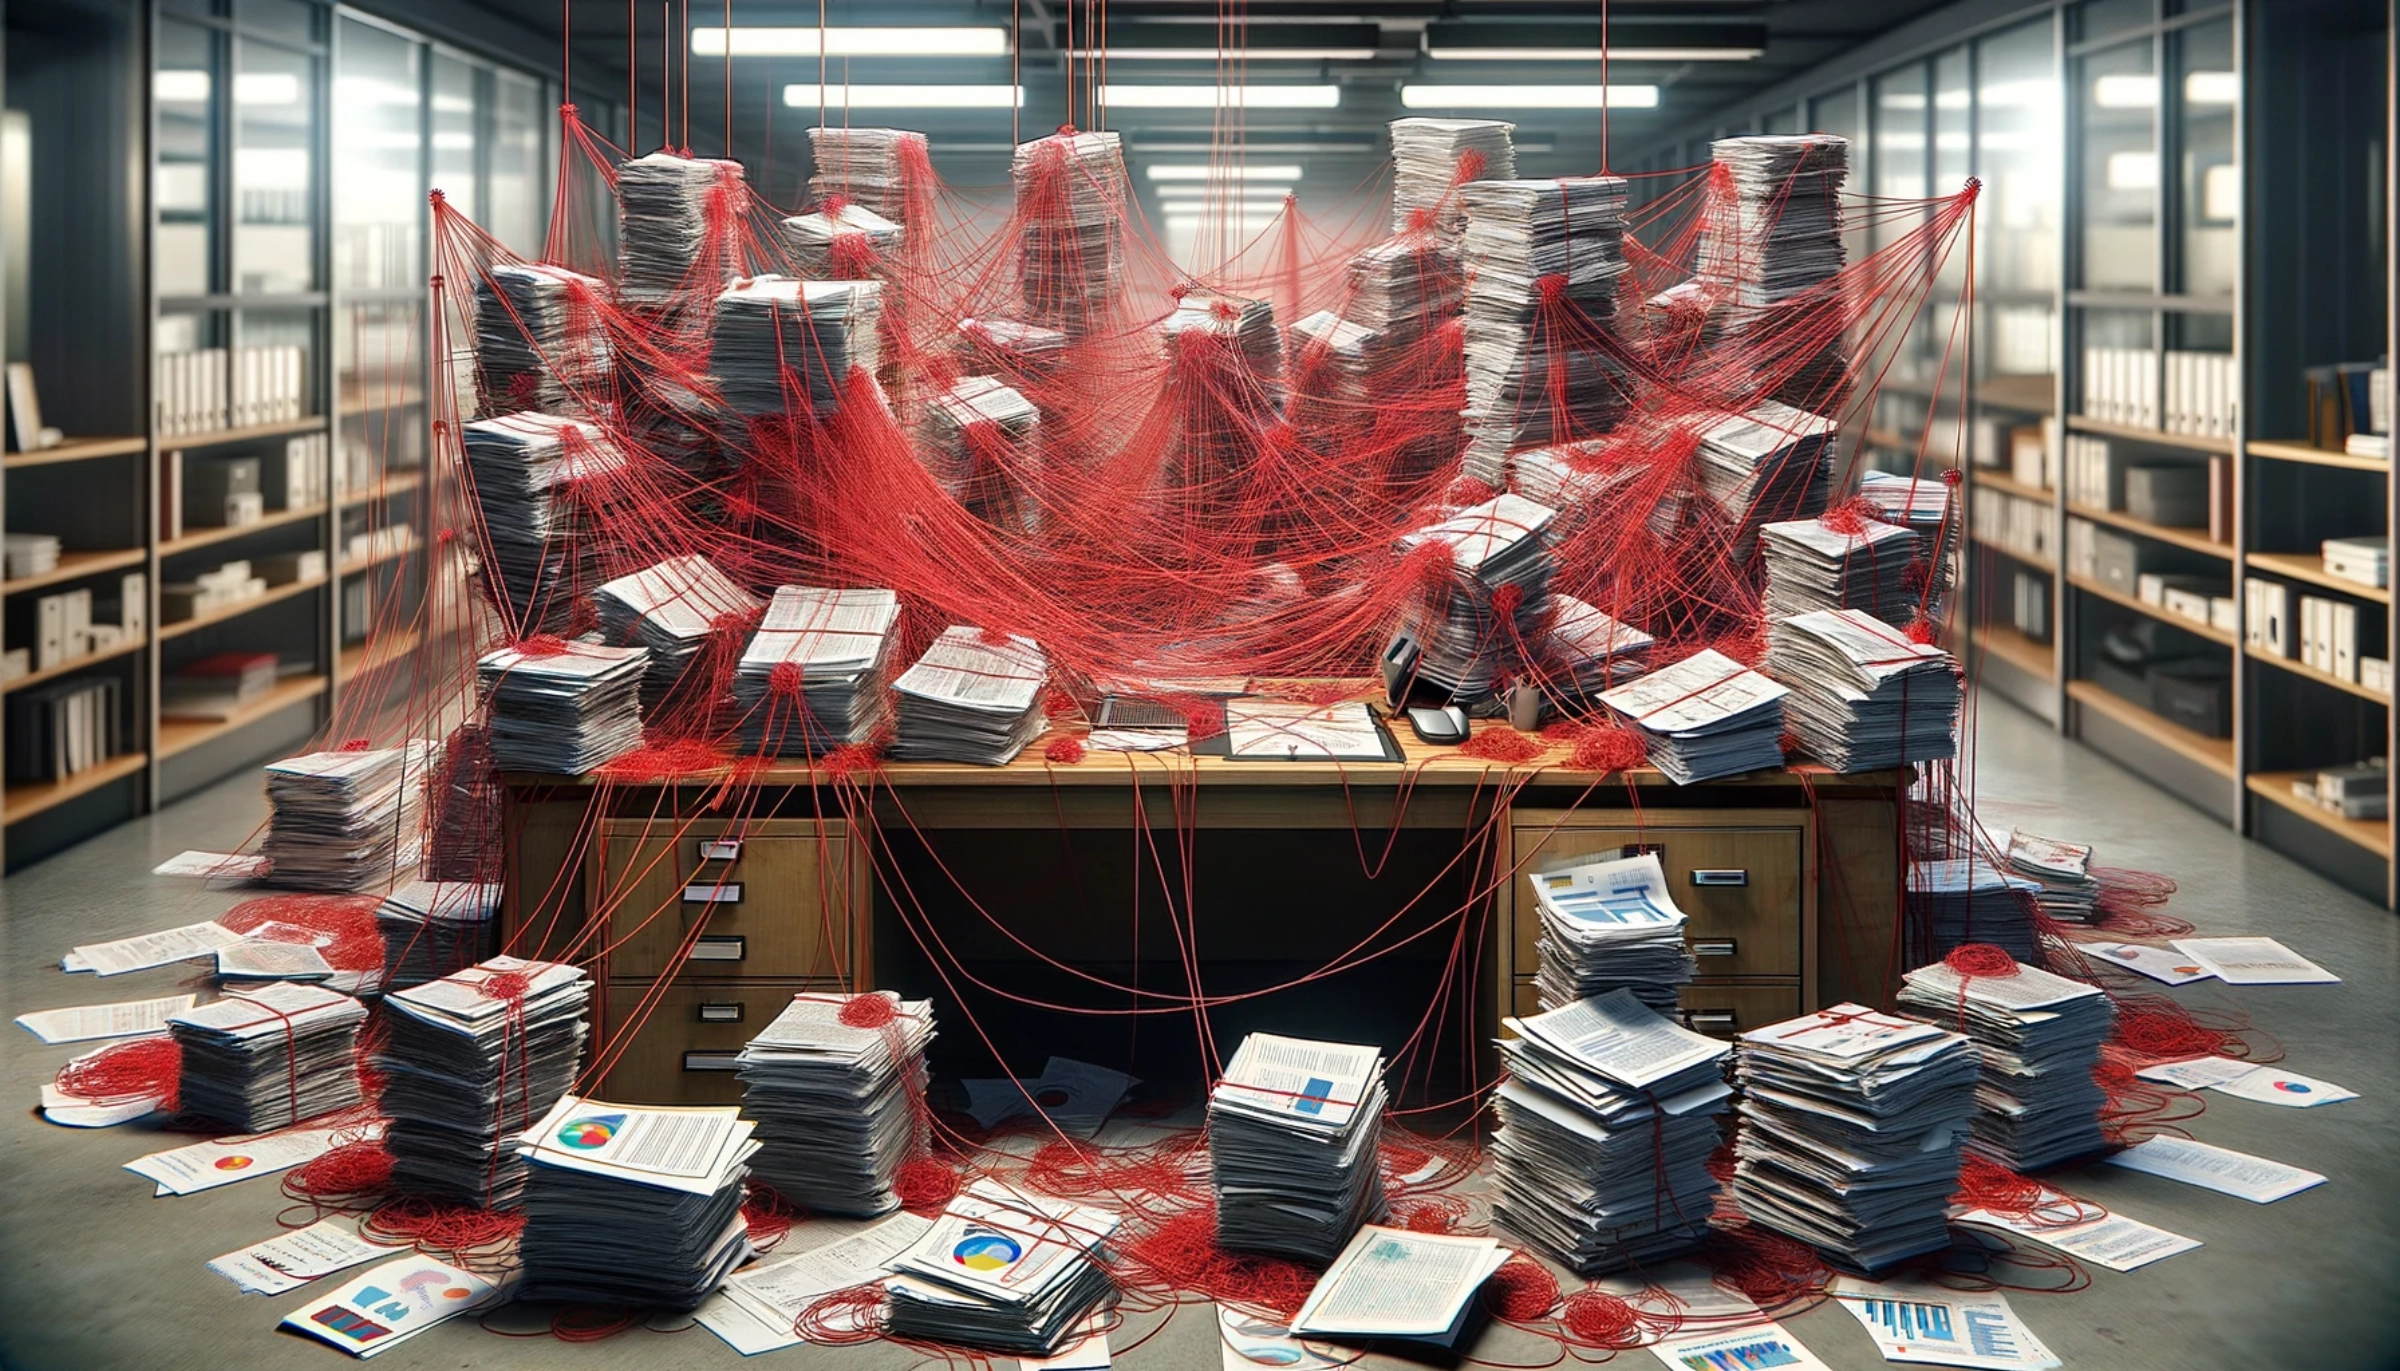 Cluttered desk overwhelmed with stacks of reports and documents, each connected by a chaotic web of red strings, symbolizing intensely interlinked data.webp